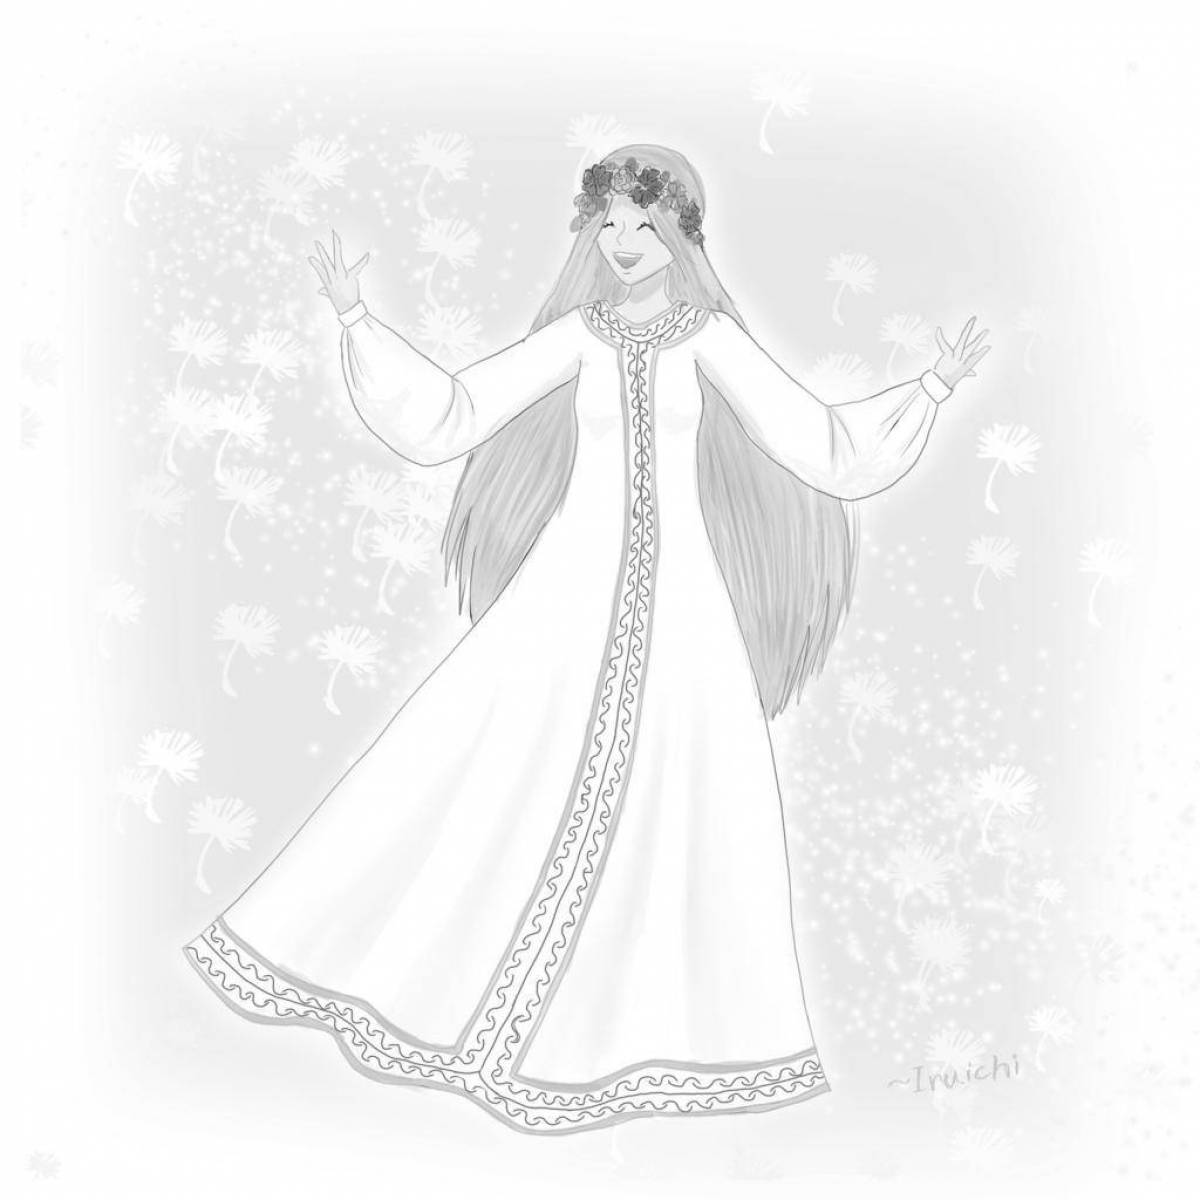 Coloring book glowing snow maiden